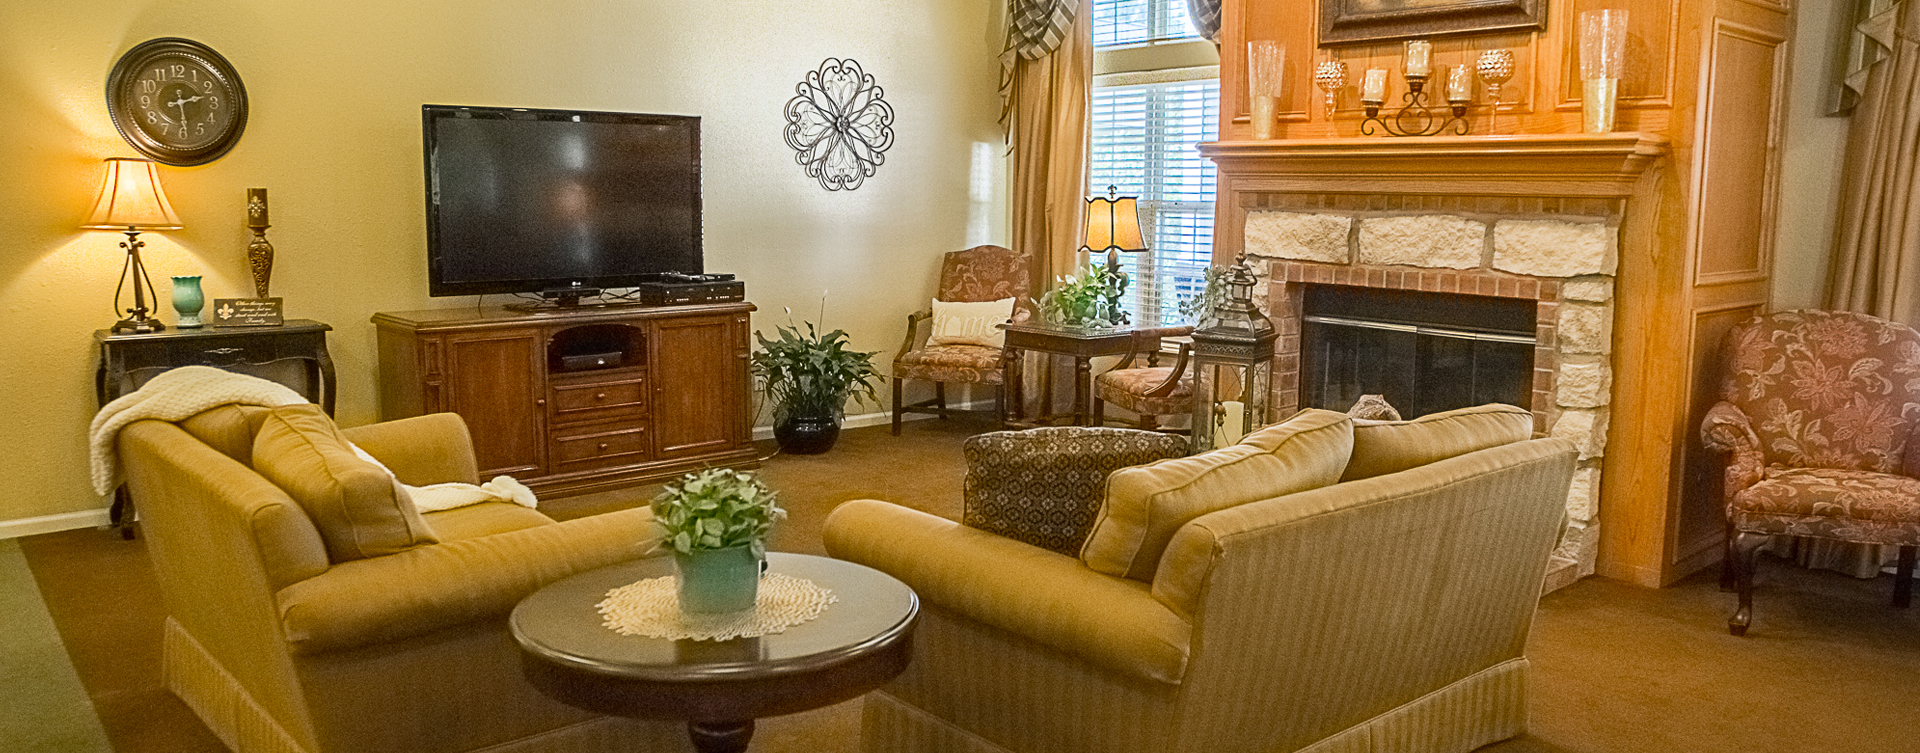 Enjoy a good book in the living room at Bickford of Muscatine